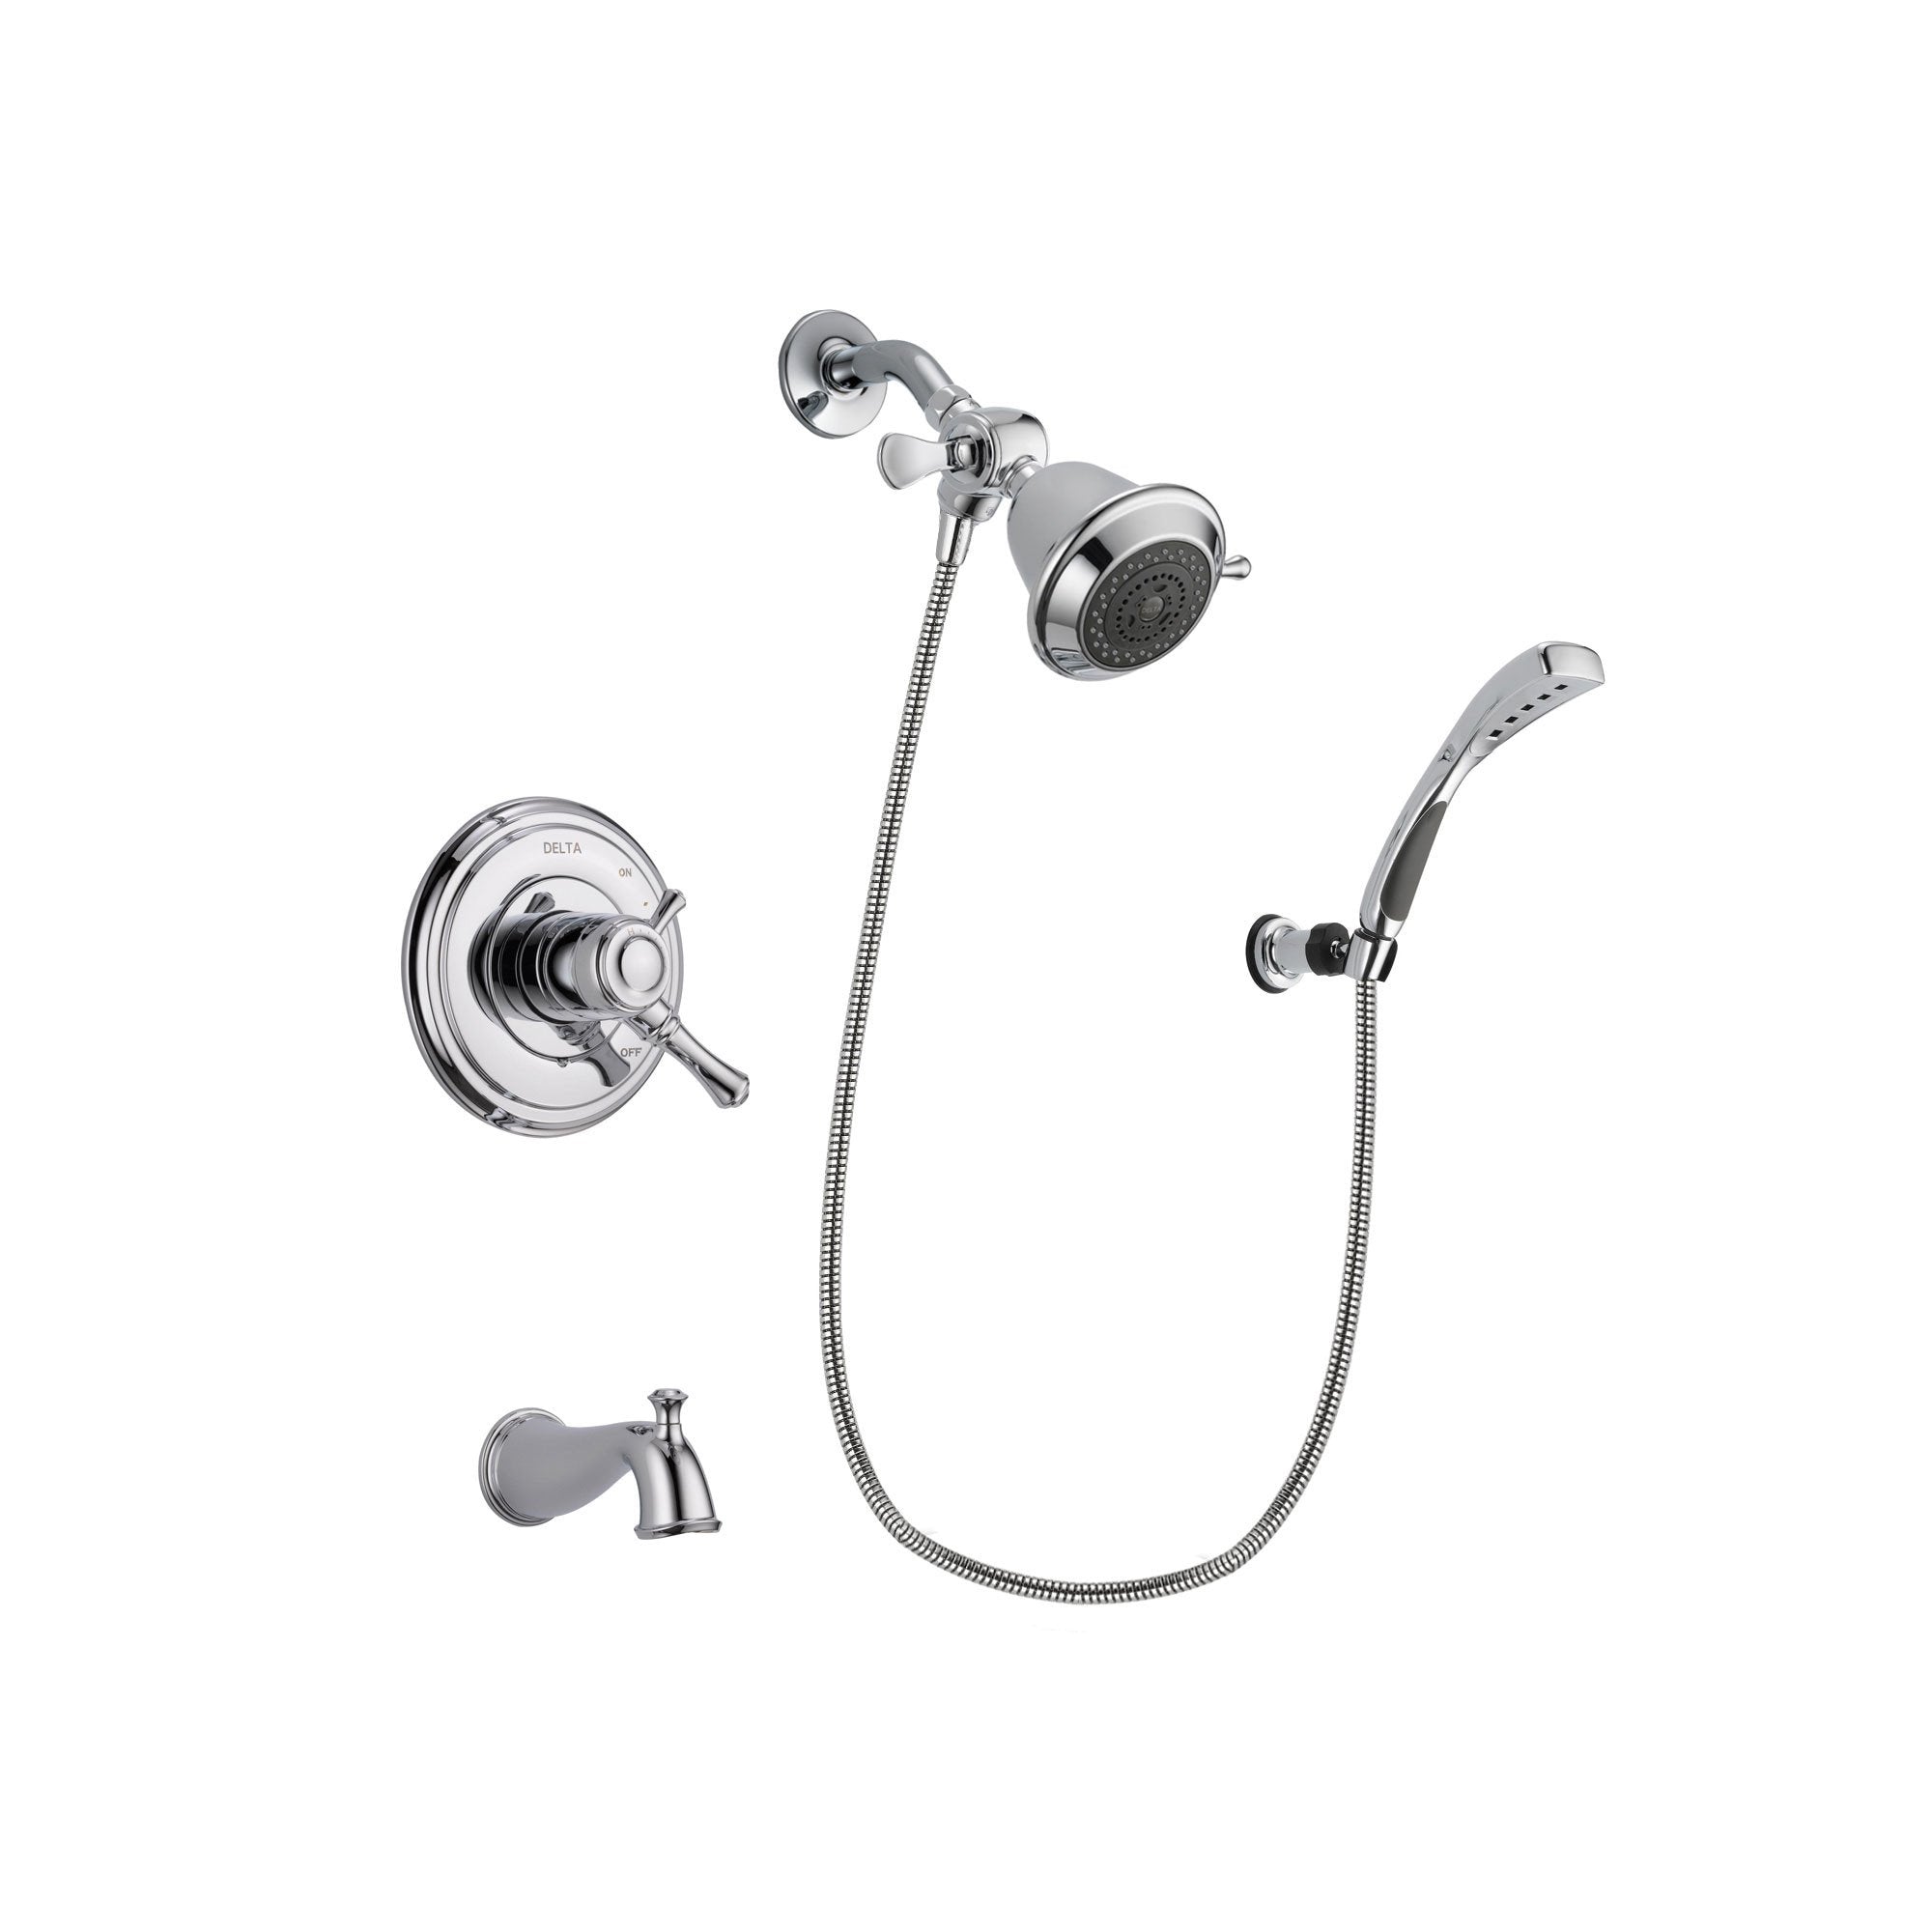 Delta Cassidy Chrome Finish Dual Control Tub and Shower Faucet System Package with Shower Head and Wall-Mount Bracket with Handheld Shower Spray Includes Rough-in Valve and Tub Spout DSP1001V